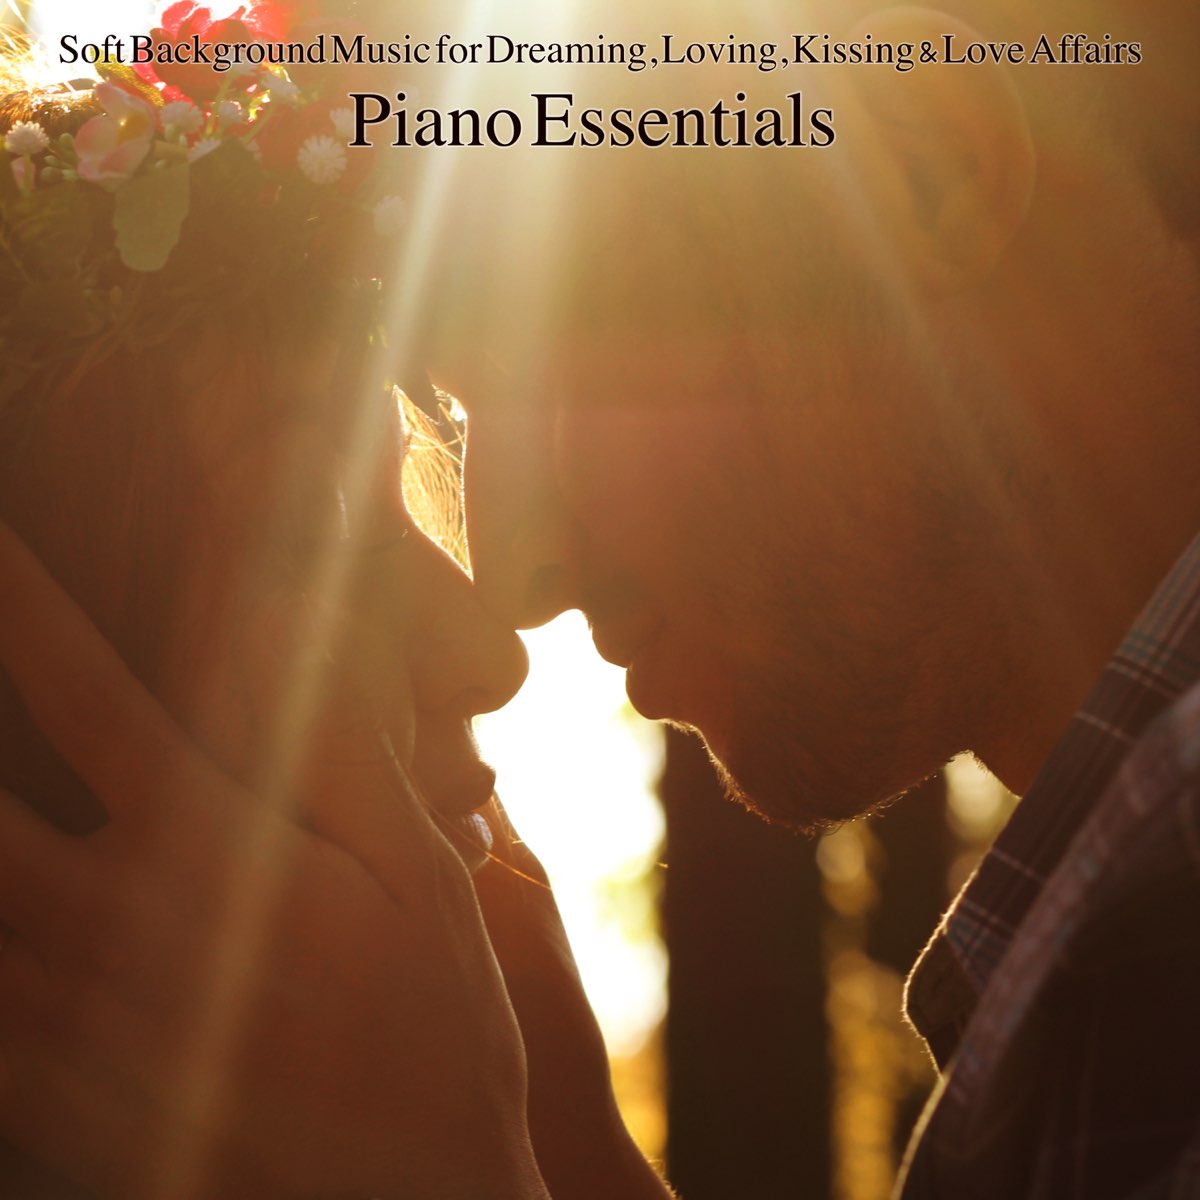 Piano Essentials – Soft Background Music for Dreaming, Loving, Kissing &  Love Affairs by Easy Listening Piano Music All Star on Apple Music